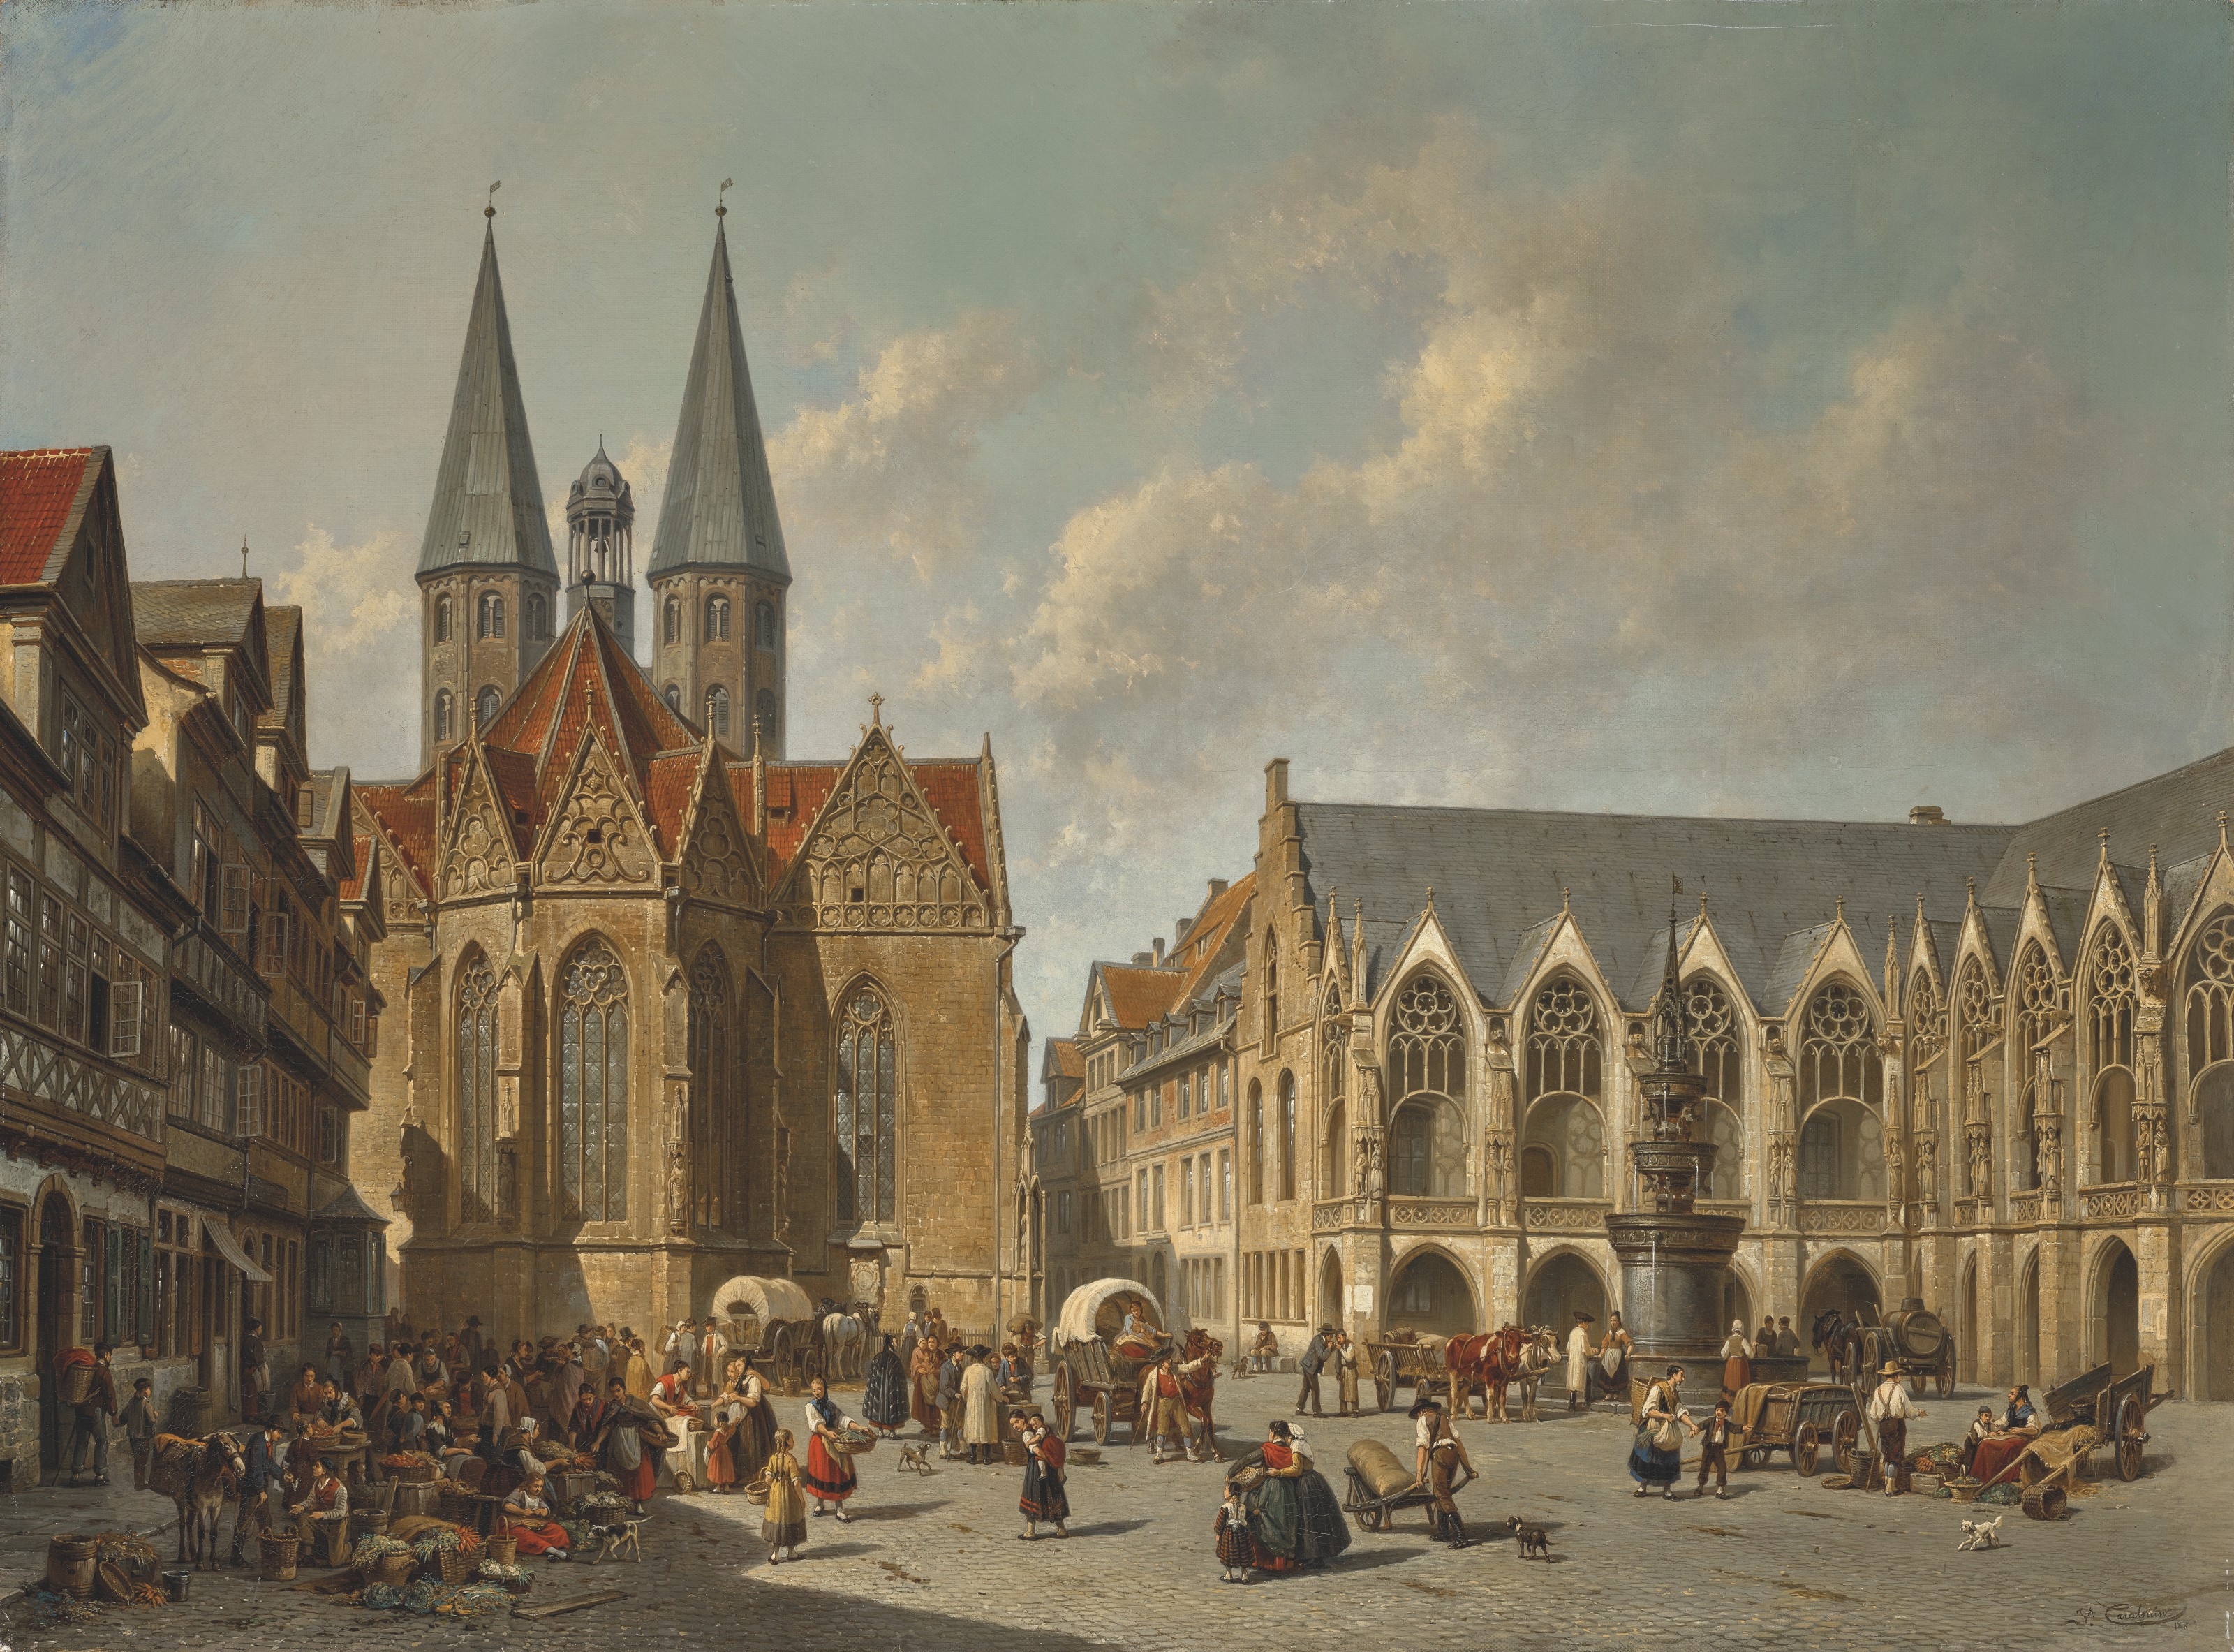 Artwork by Jacques François Carabain, The town square of Braunschweig, Made of oil on canvas